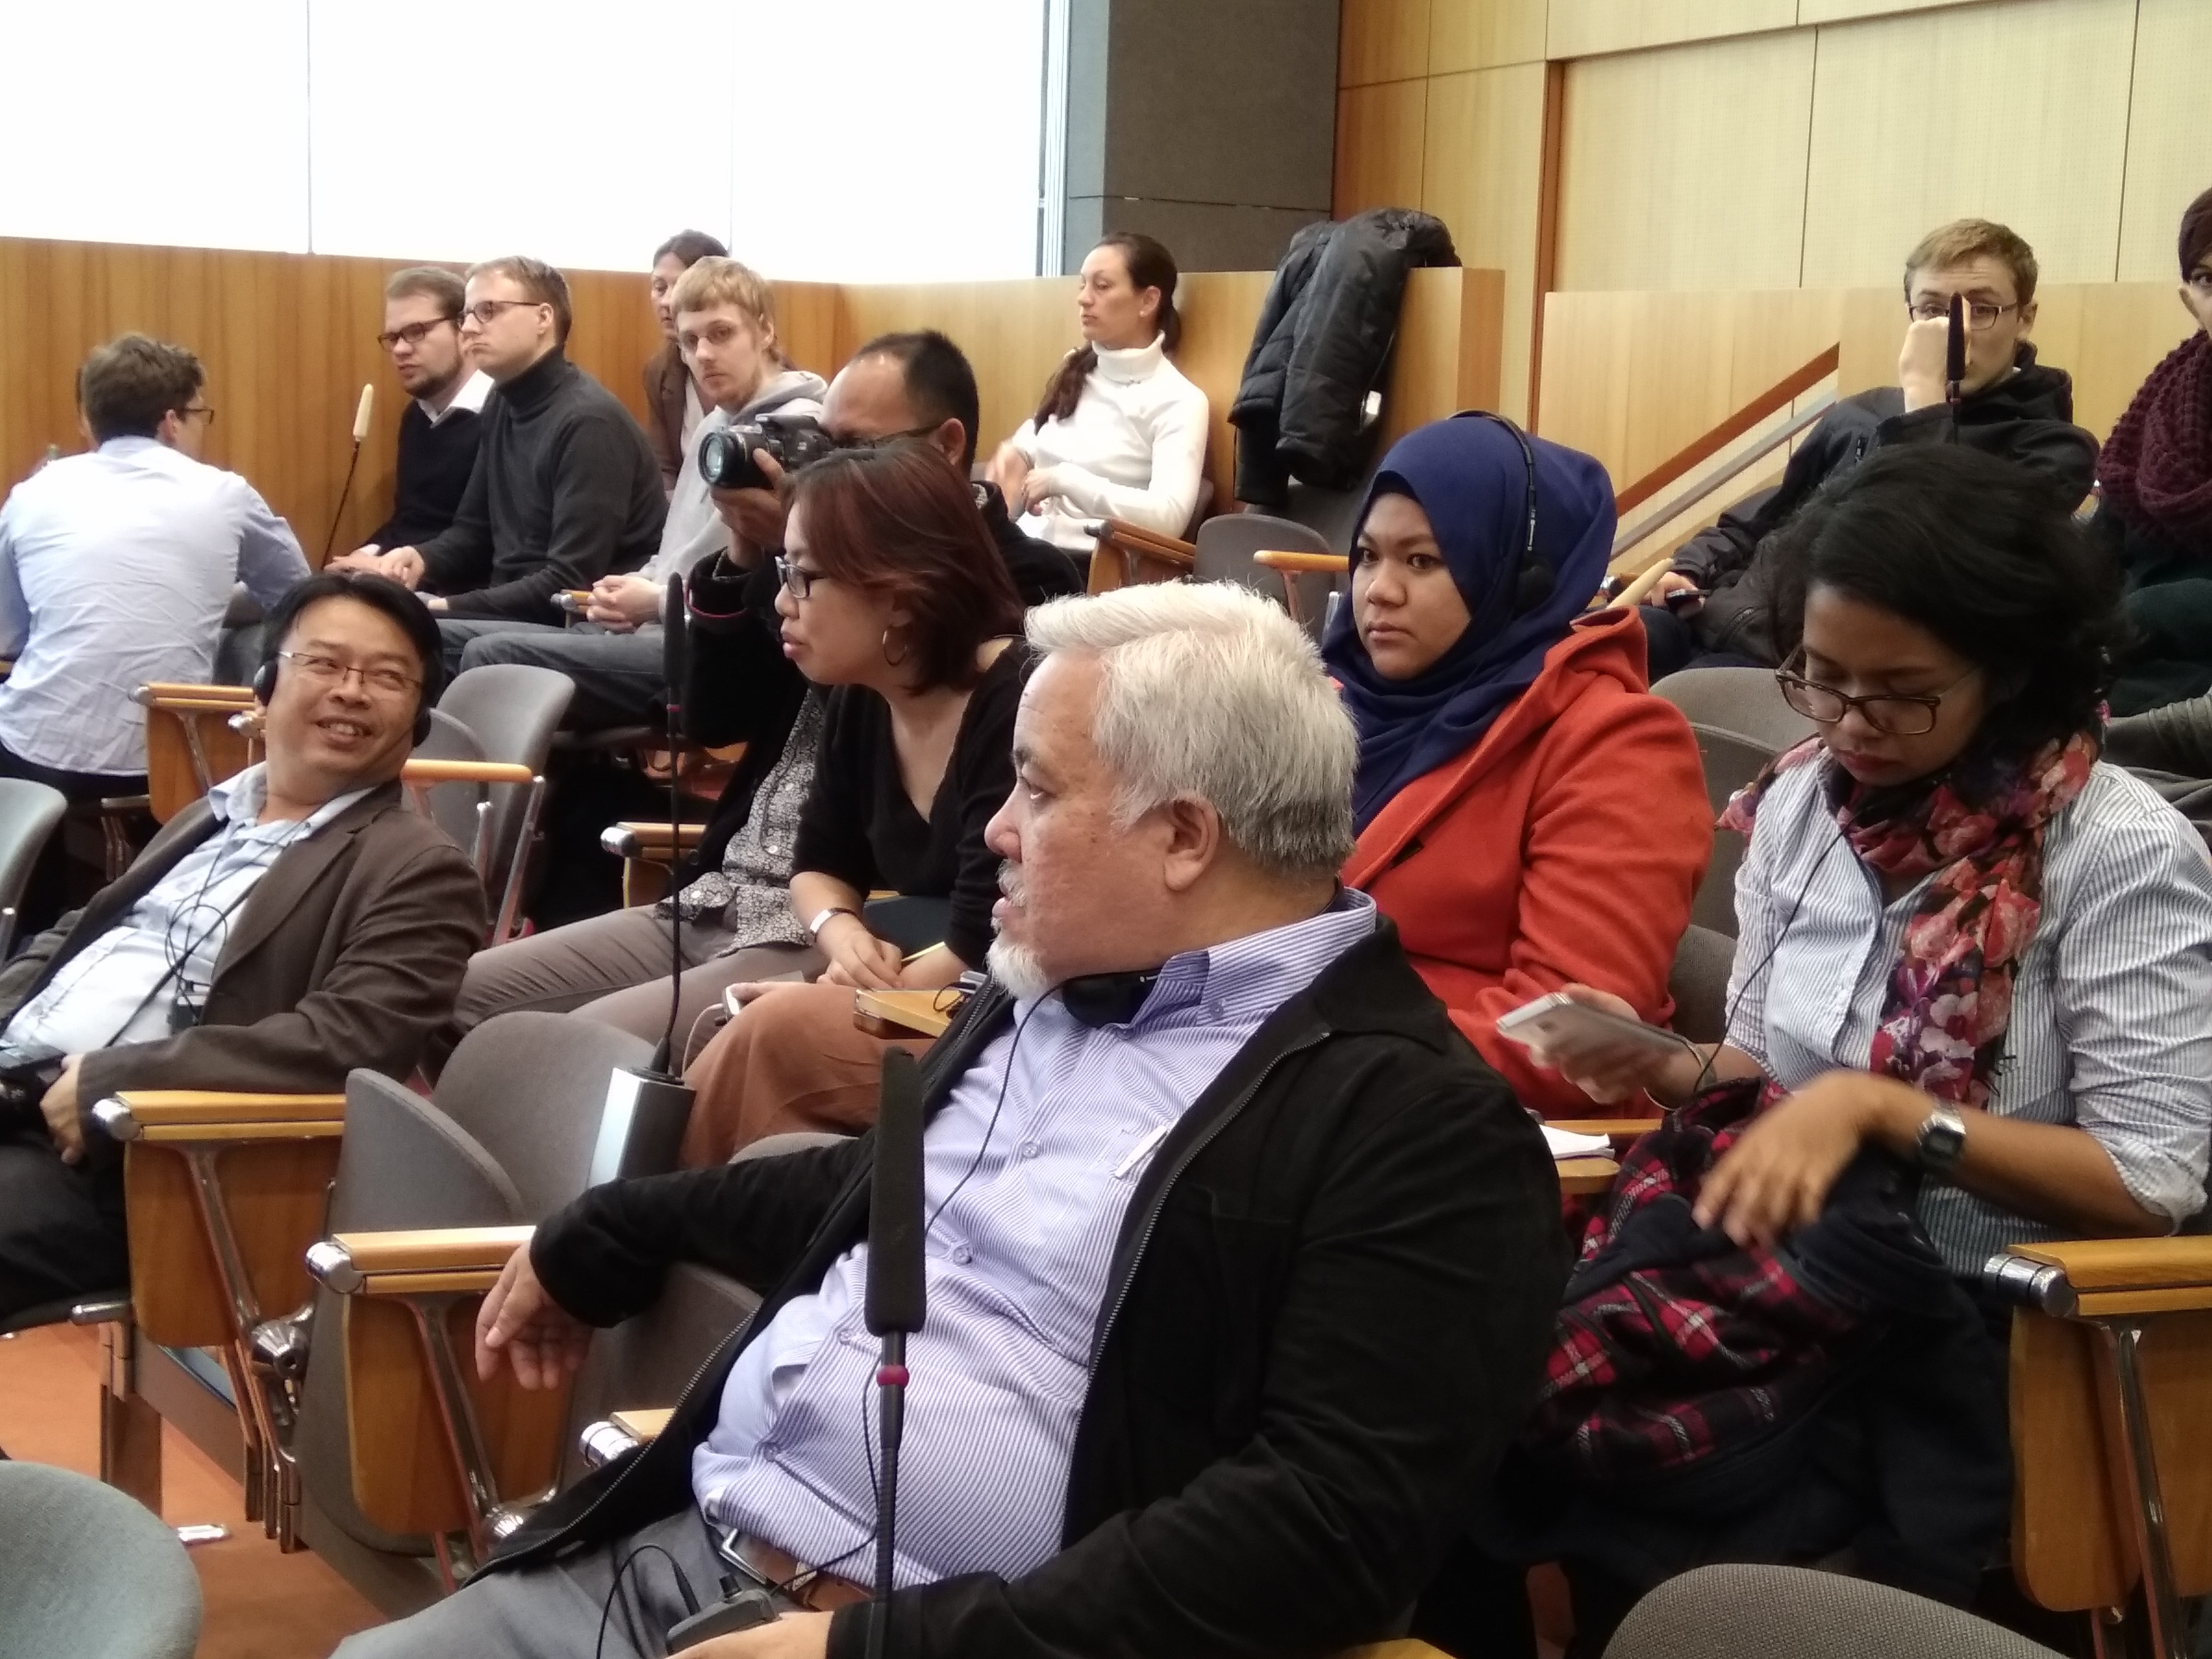 Malaysiakini visits the Parliament Building, Germany